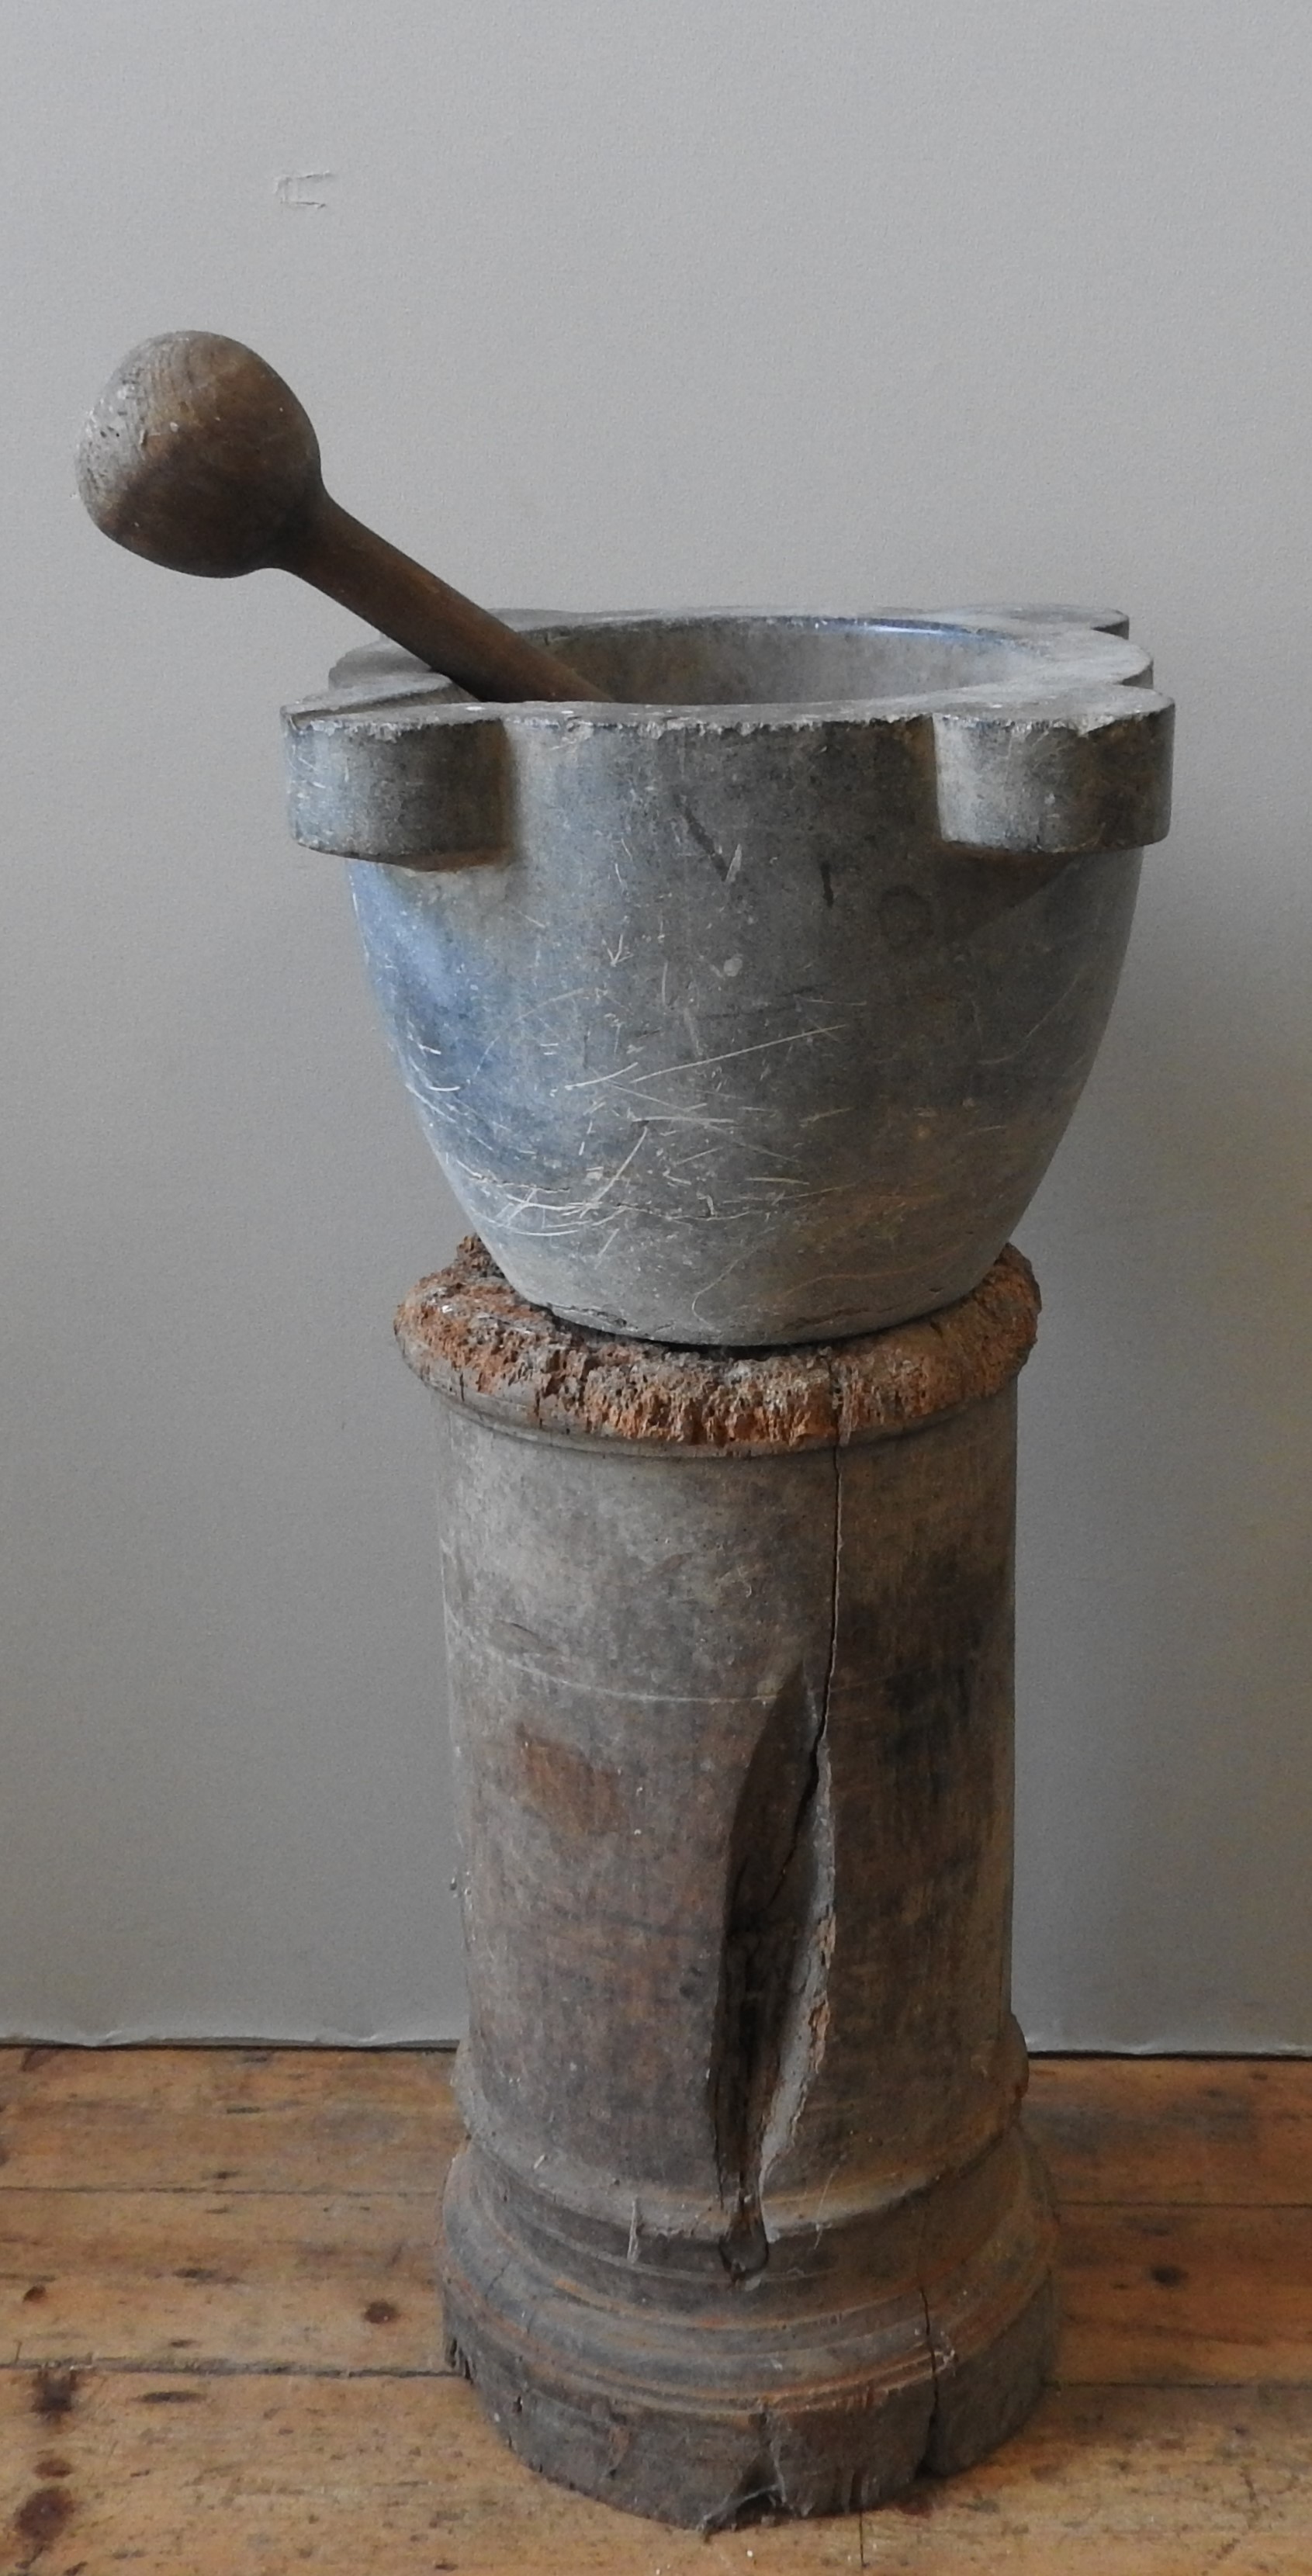 A LARGE 18TH CENTURY GREY MARBLE MORTAR ON TURNED WOODEN COLUMN STAND, with substantial woodeN